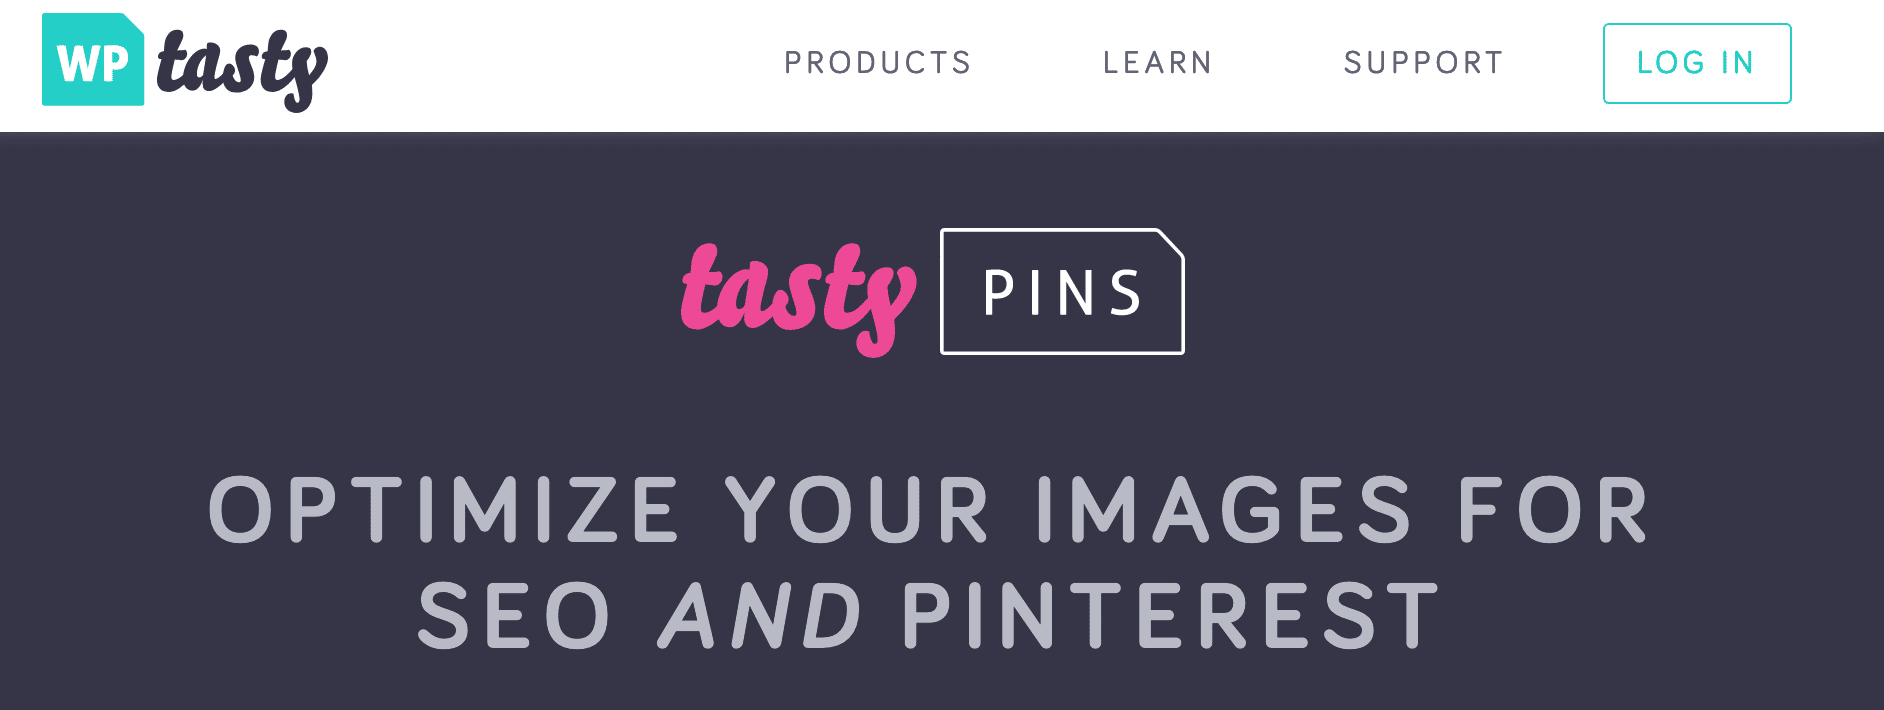 Tasty Pins allows to optimize your images for SEO and Pinterest.